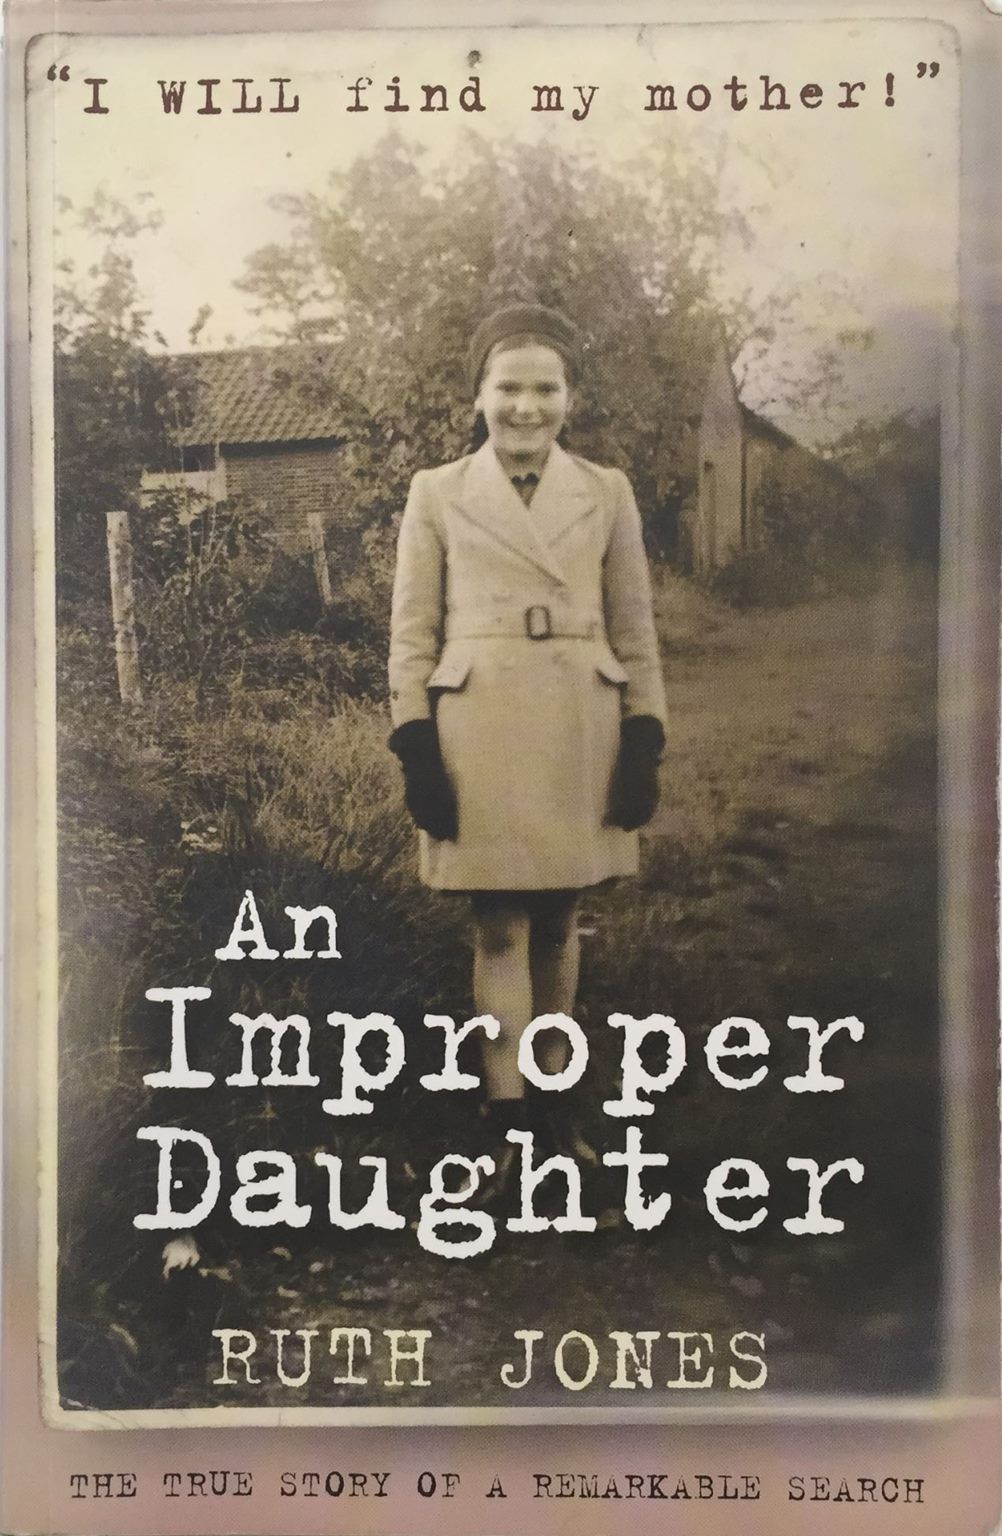 AN IMPROPER DAUGHTER: I will find my mother!